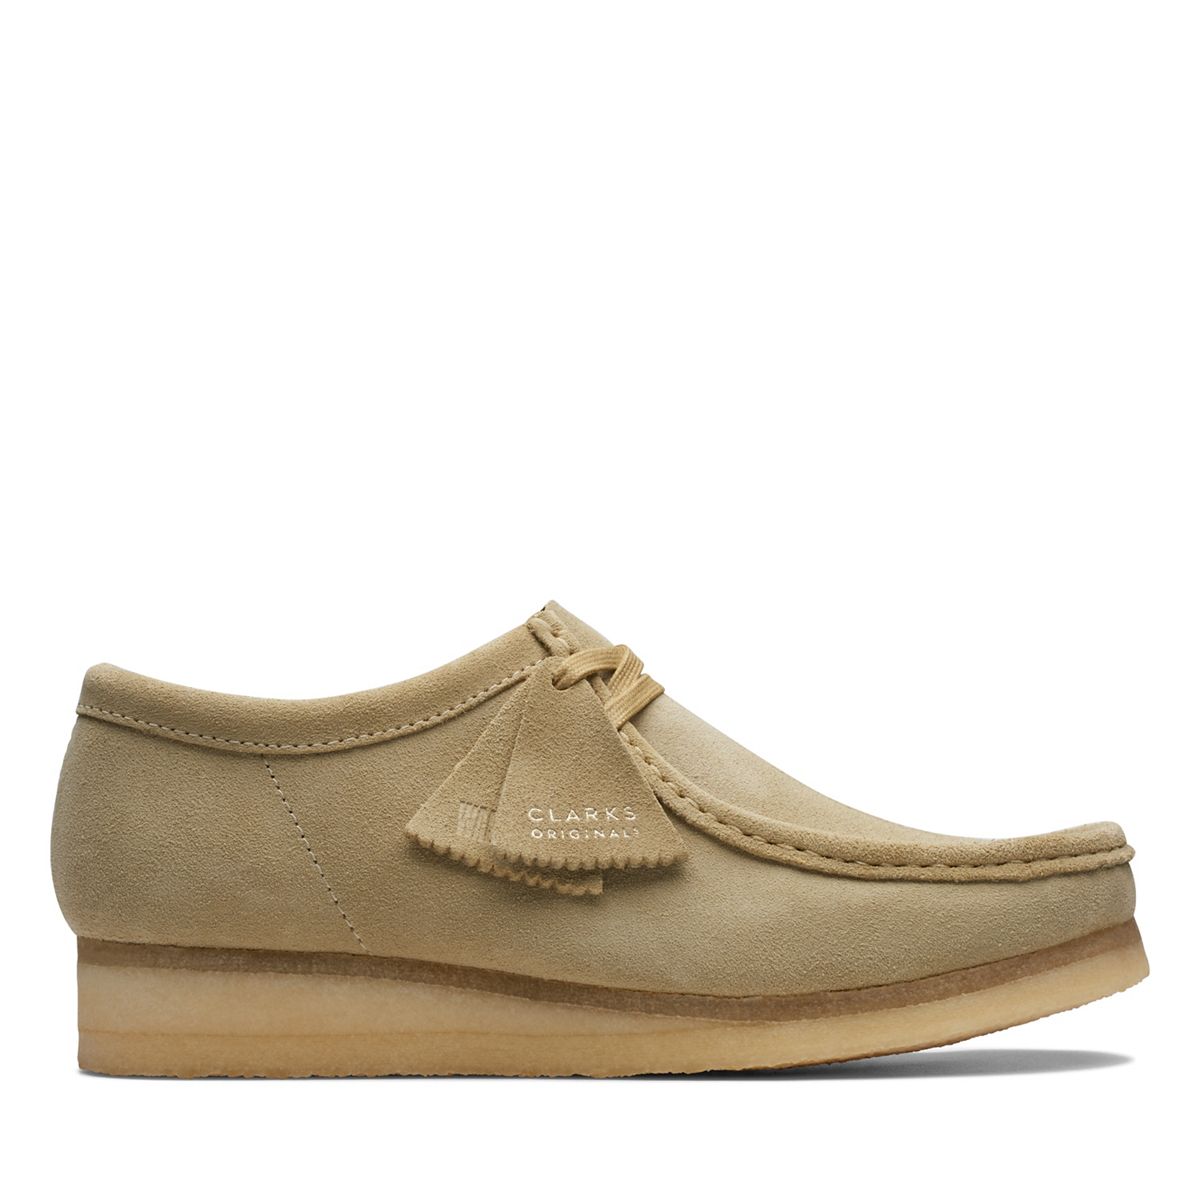 Maple - Clarks Canada Official Site | Clarks Shoes